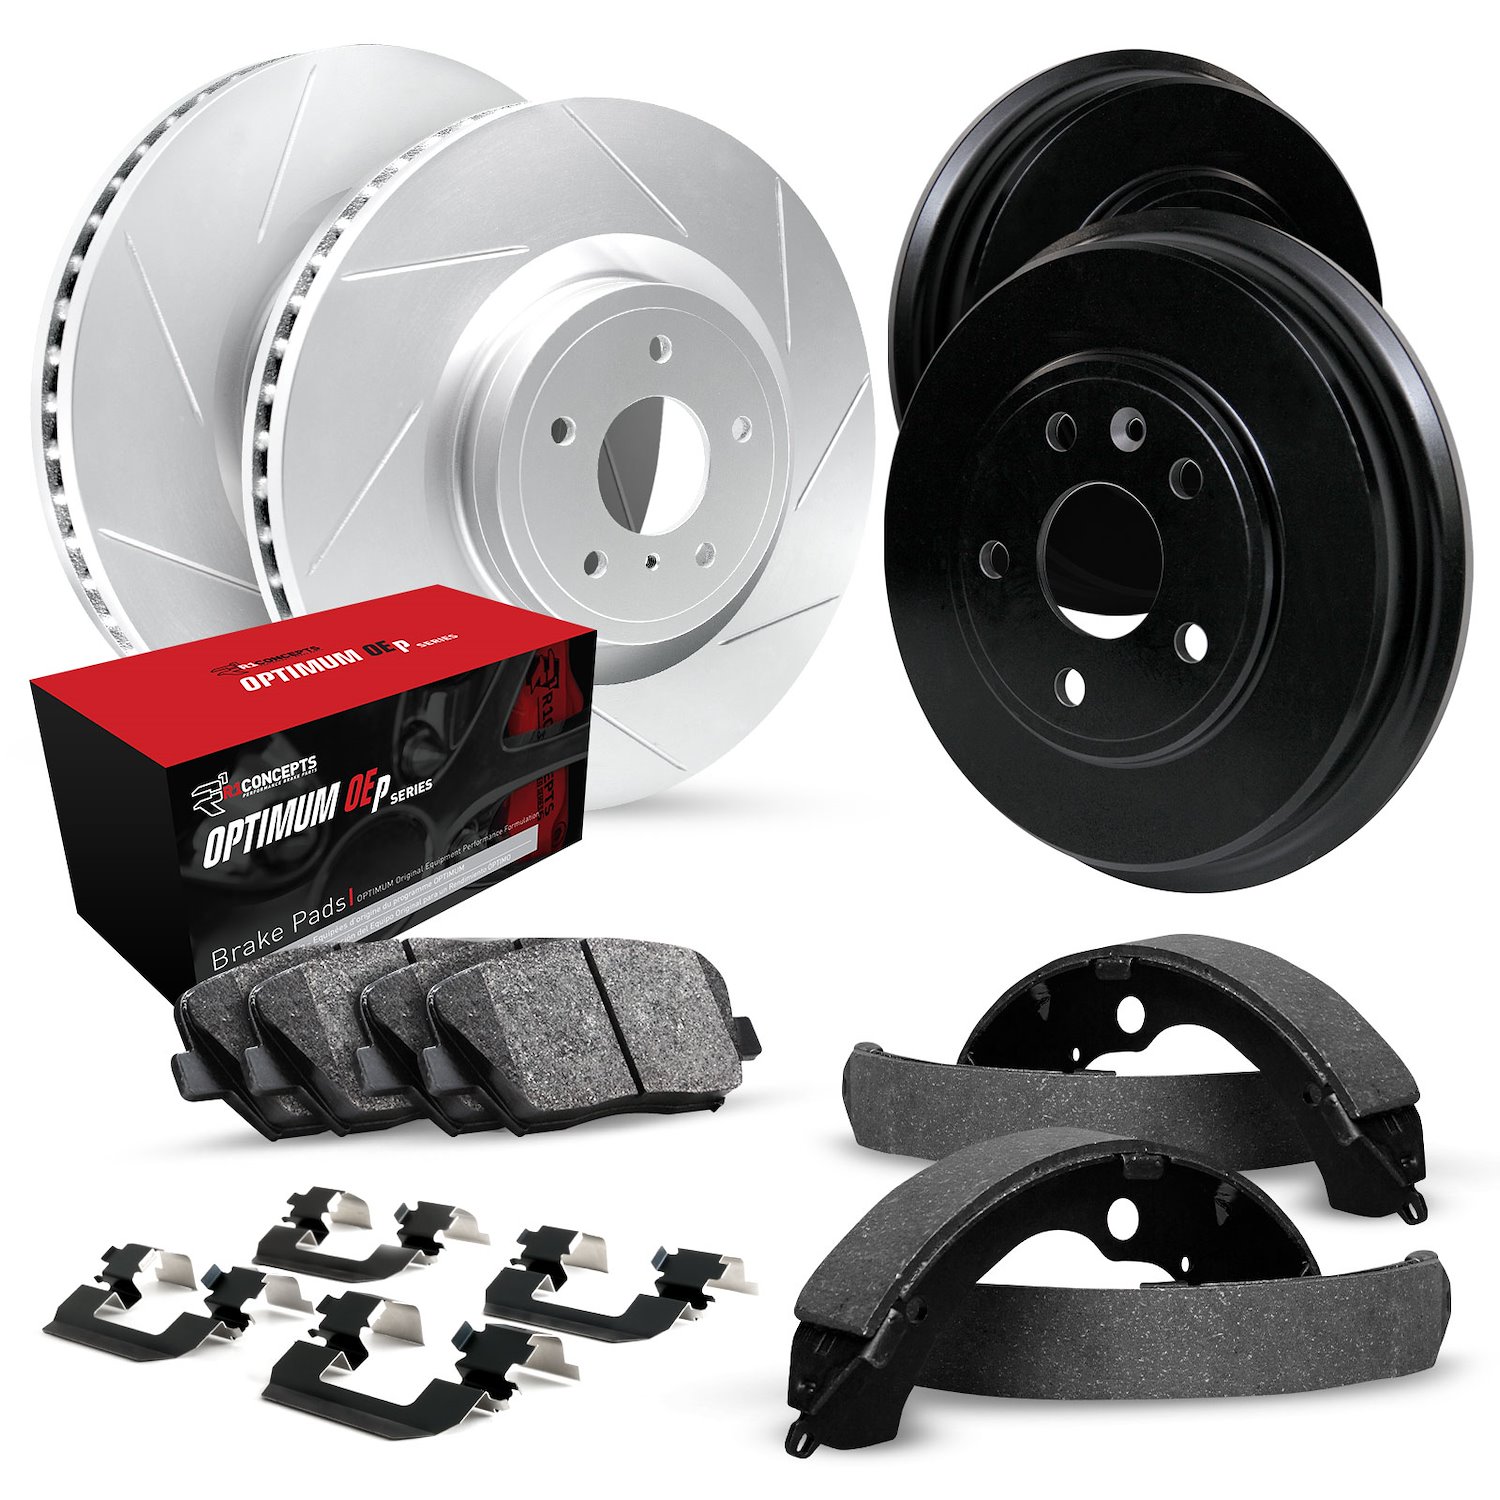 GEO-Carbon Slotted Brake Rotor & Drum Set w/Optimum OE Pads, Shoes, & Hardware, 1984-1990 GM, Position: Front & Rear